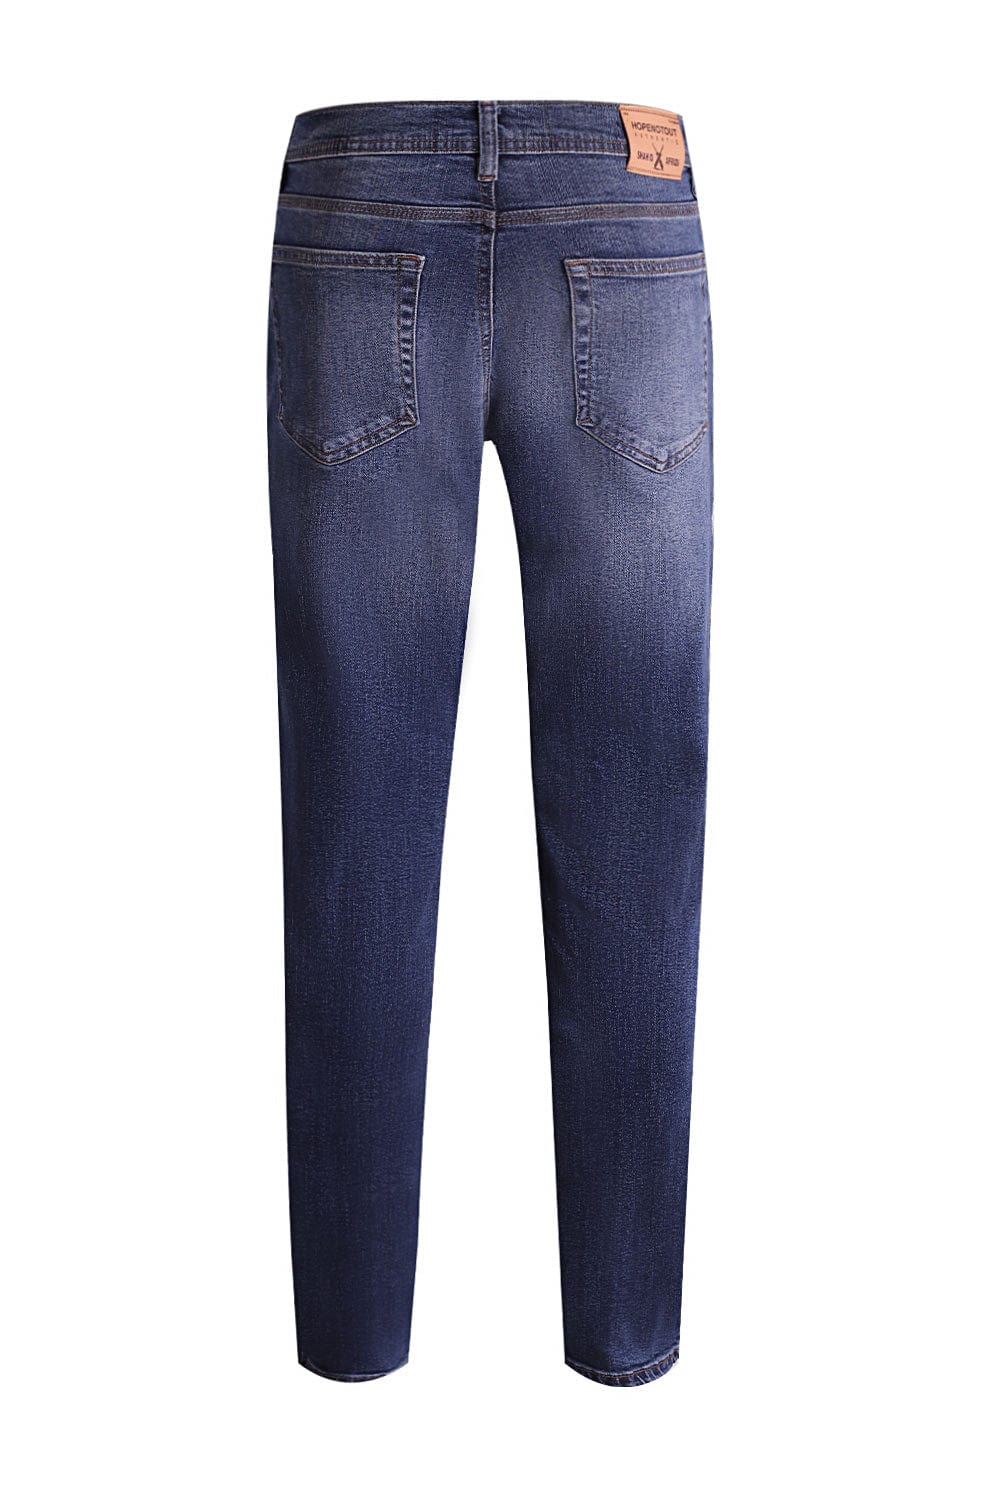 Hope Not Out by Shahid Afridi Men Jeans Slim Straight Fit Stretch Denim